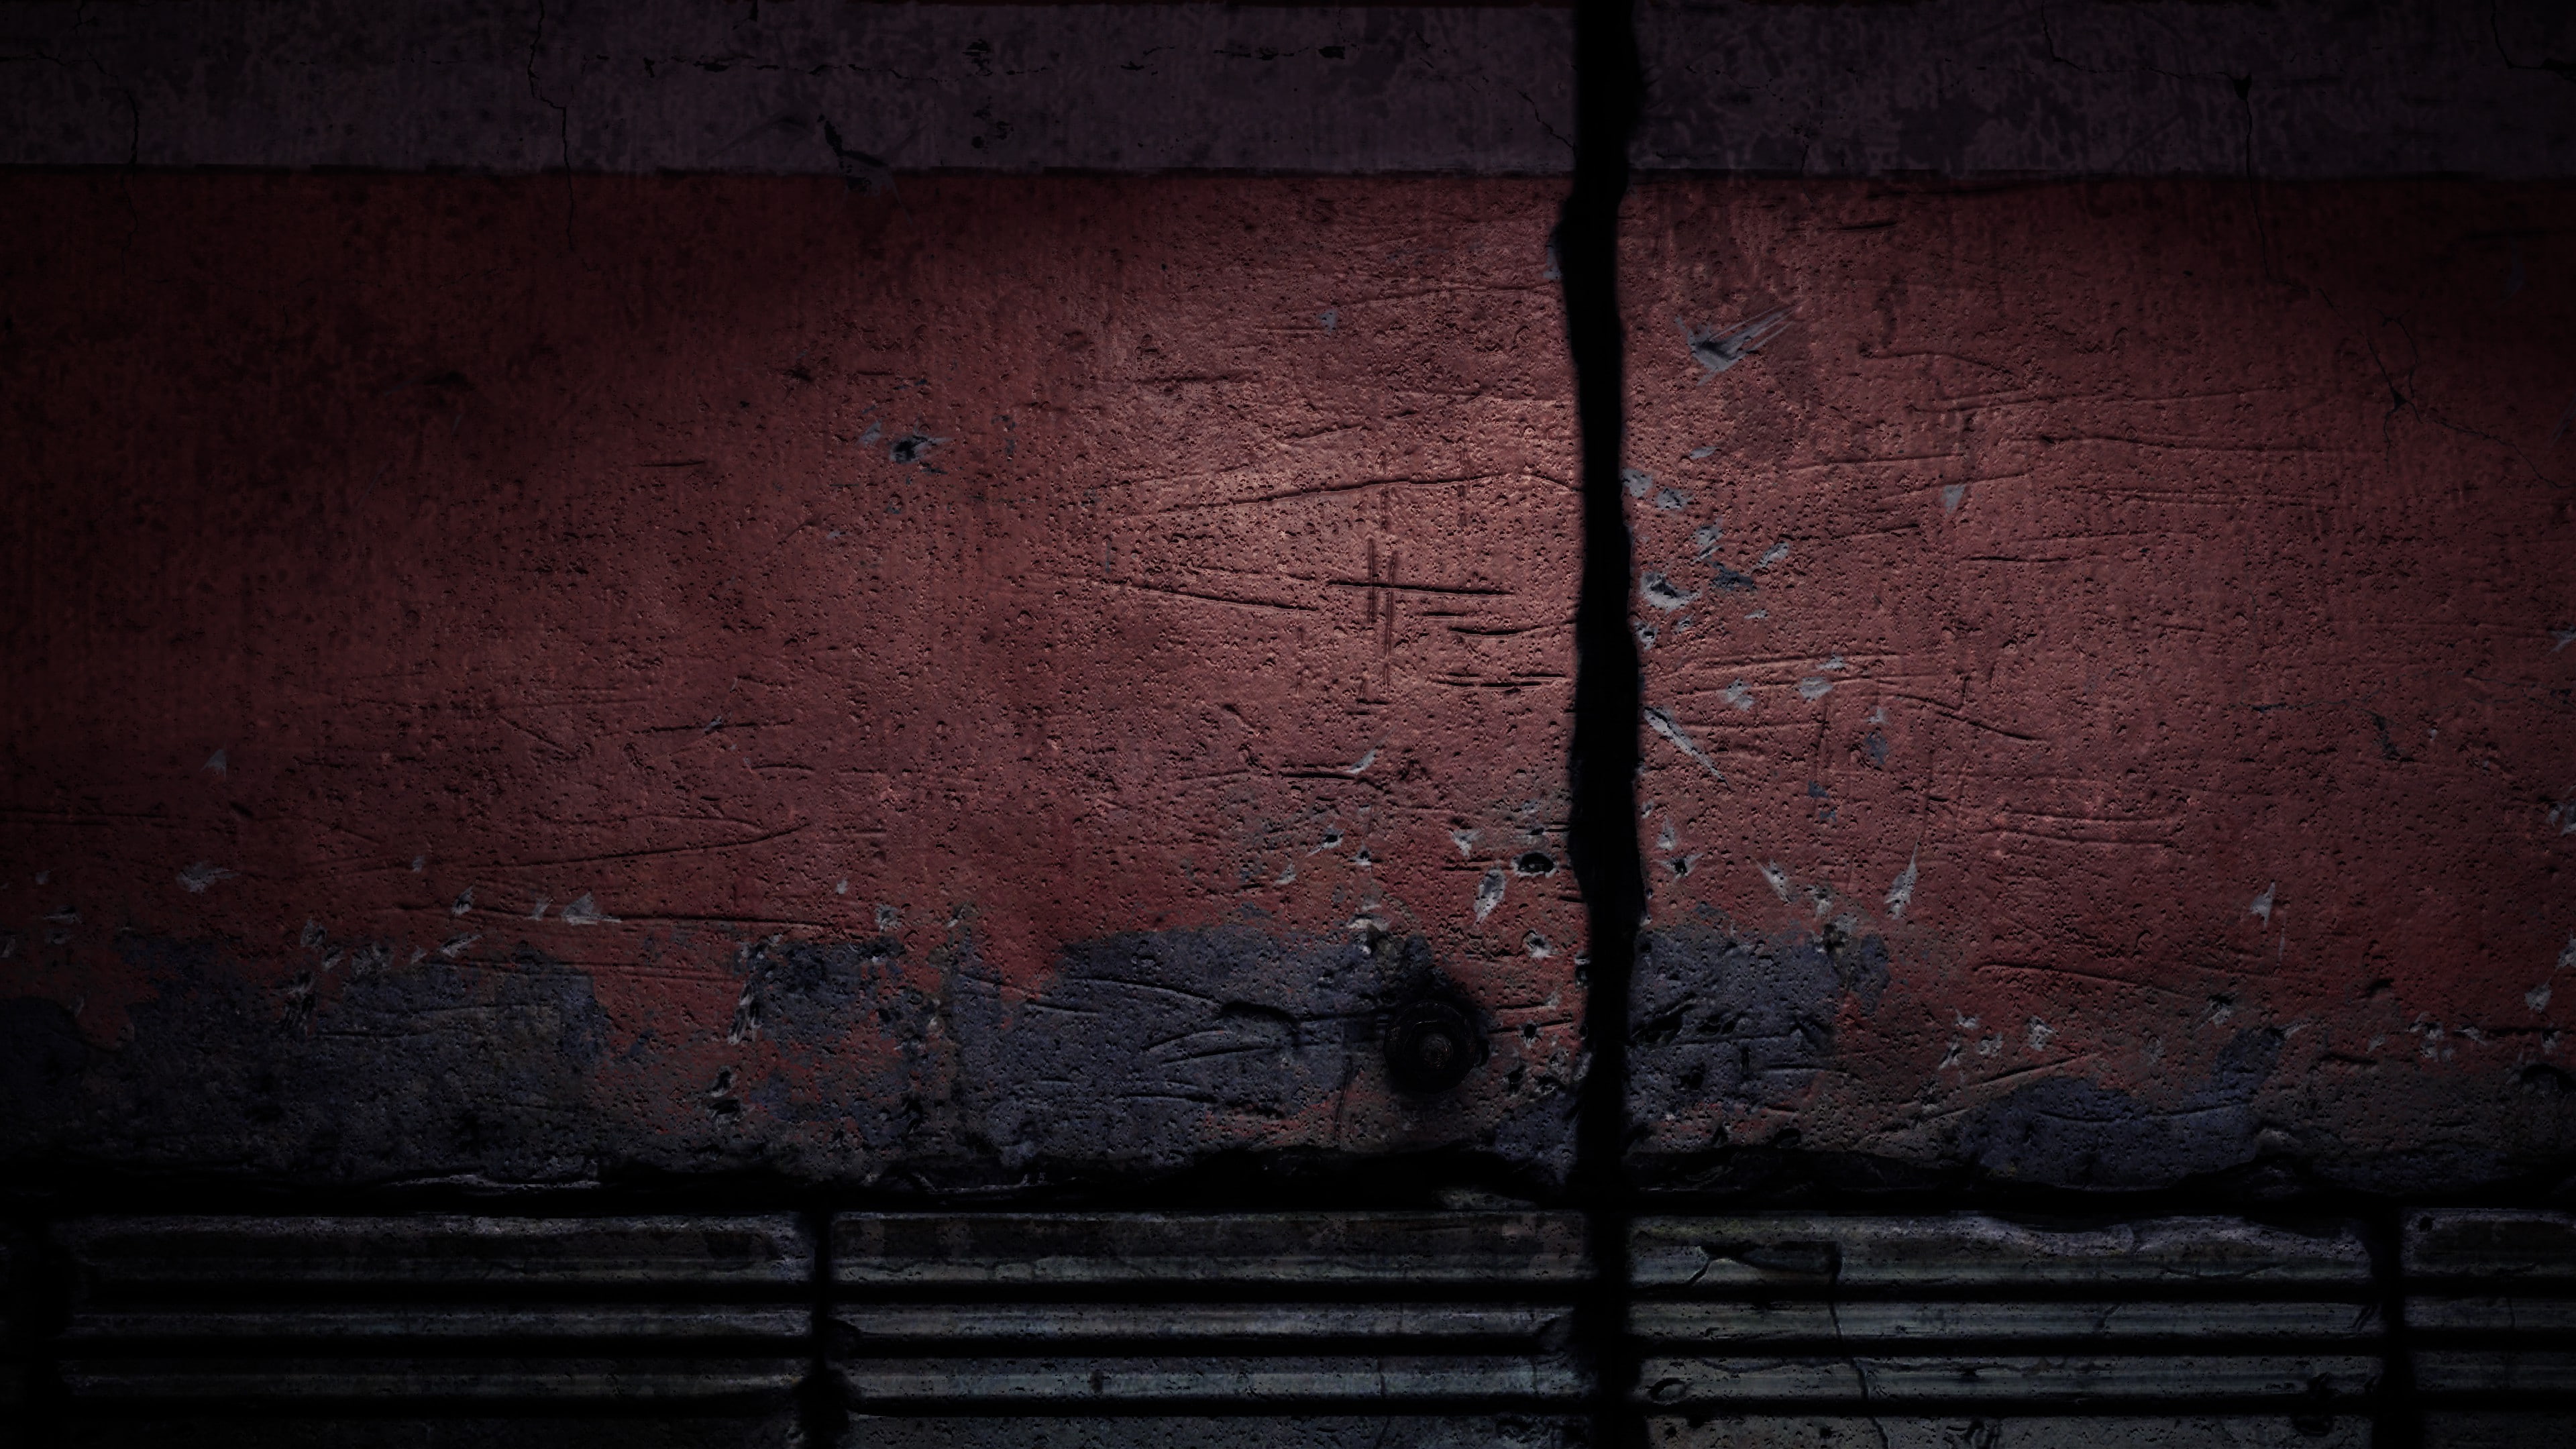 wall, old, red, video games, Shadow Warrior 2, textured, wall - building feature